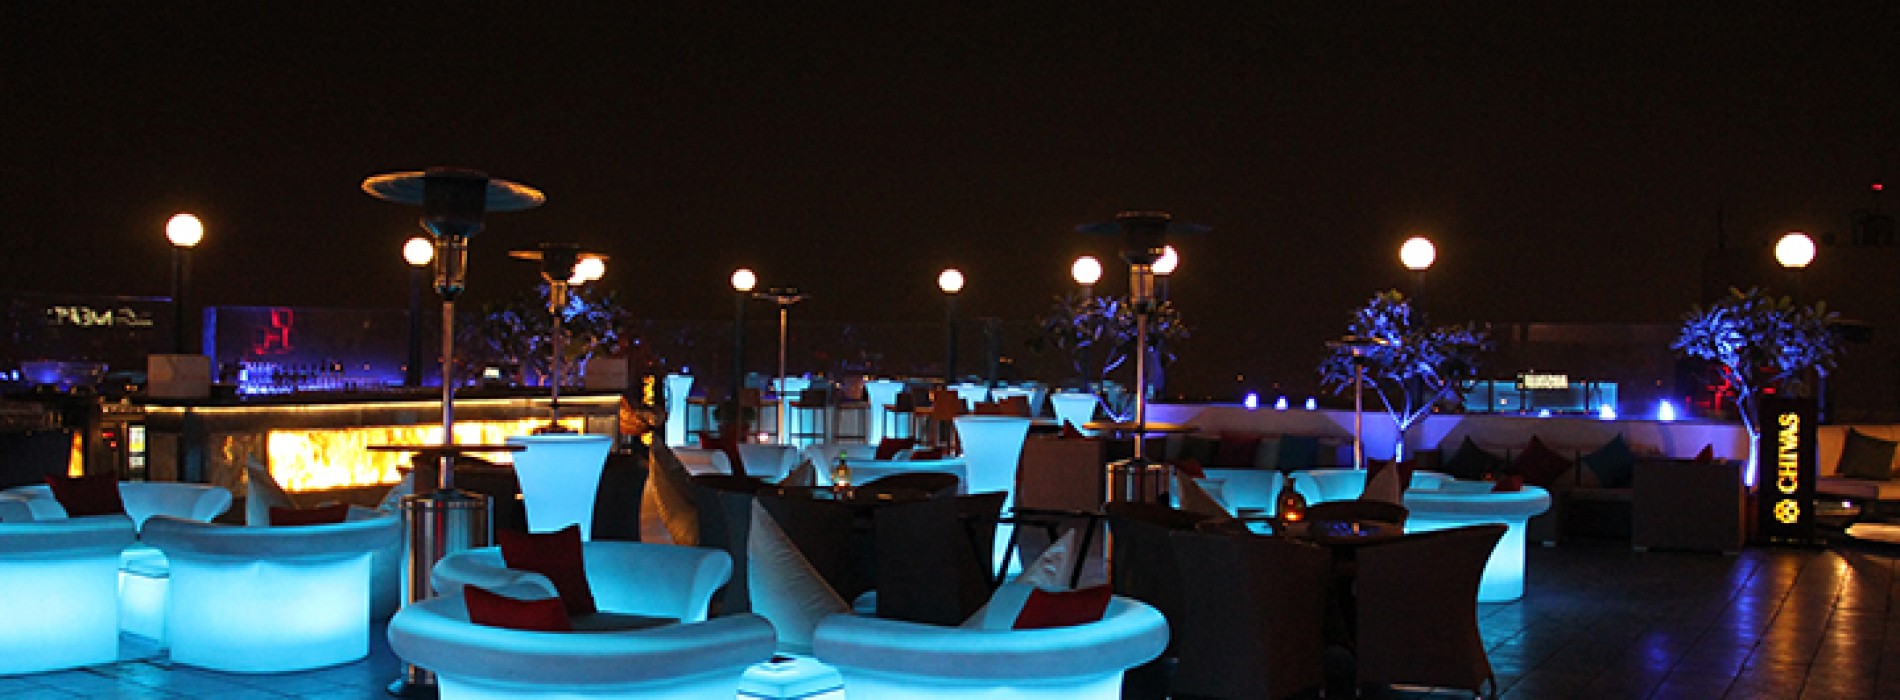 Hotel Royal Plaza launches Sky Lounge Bar & Grill